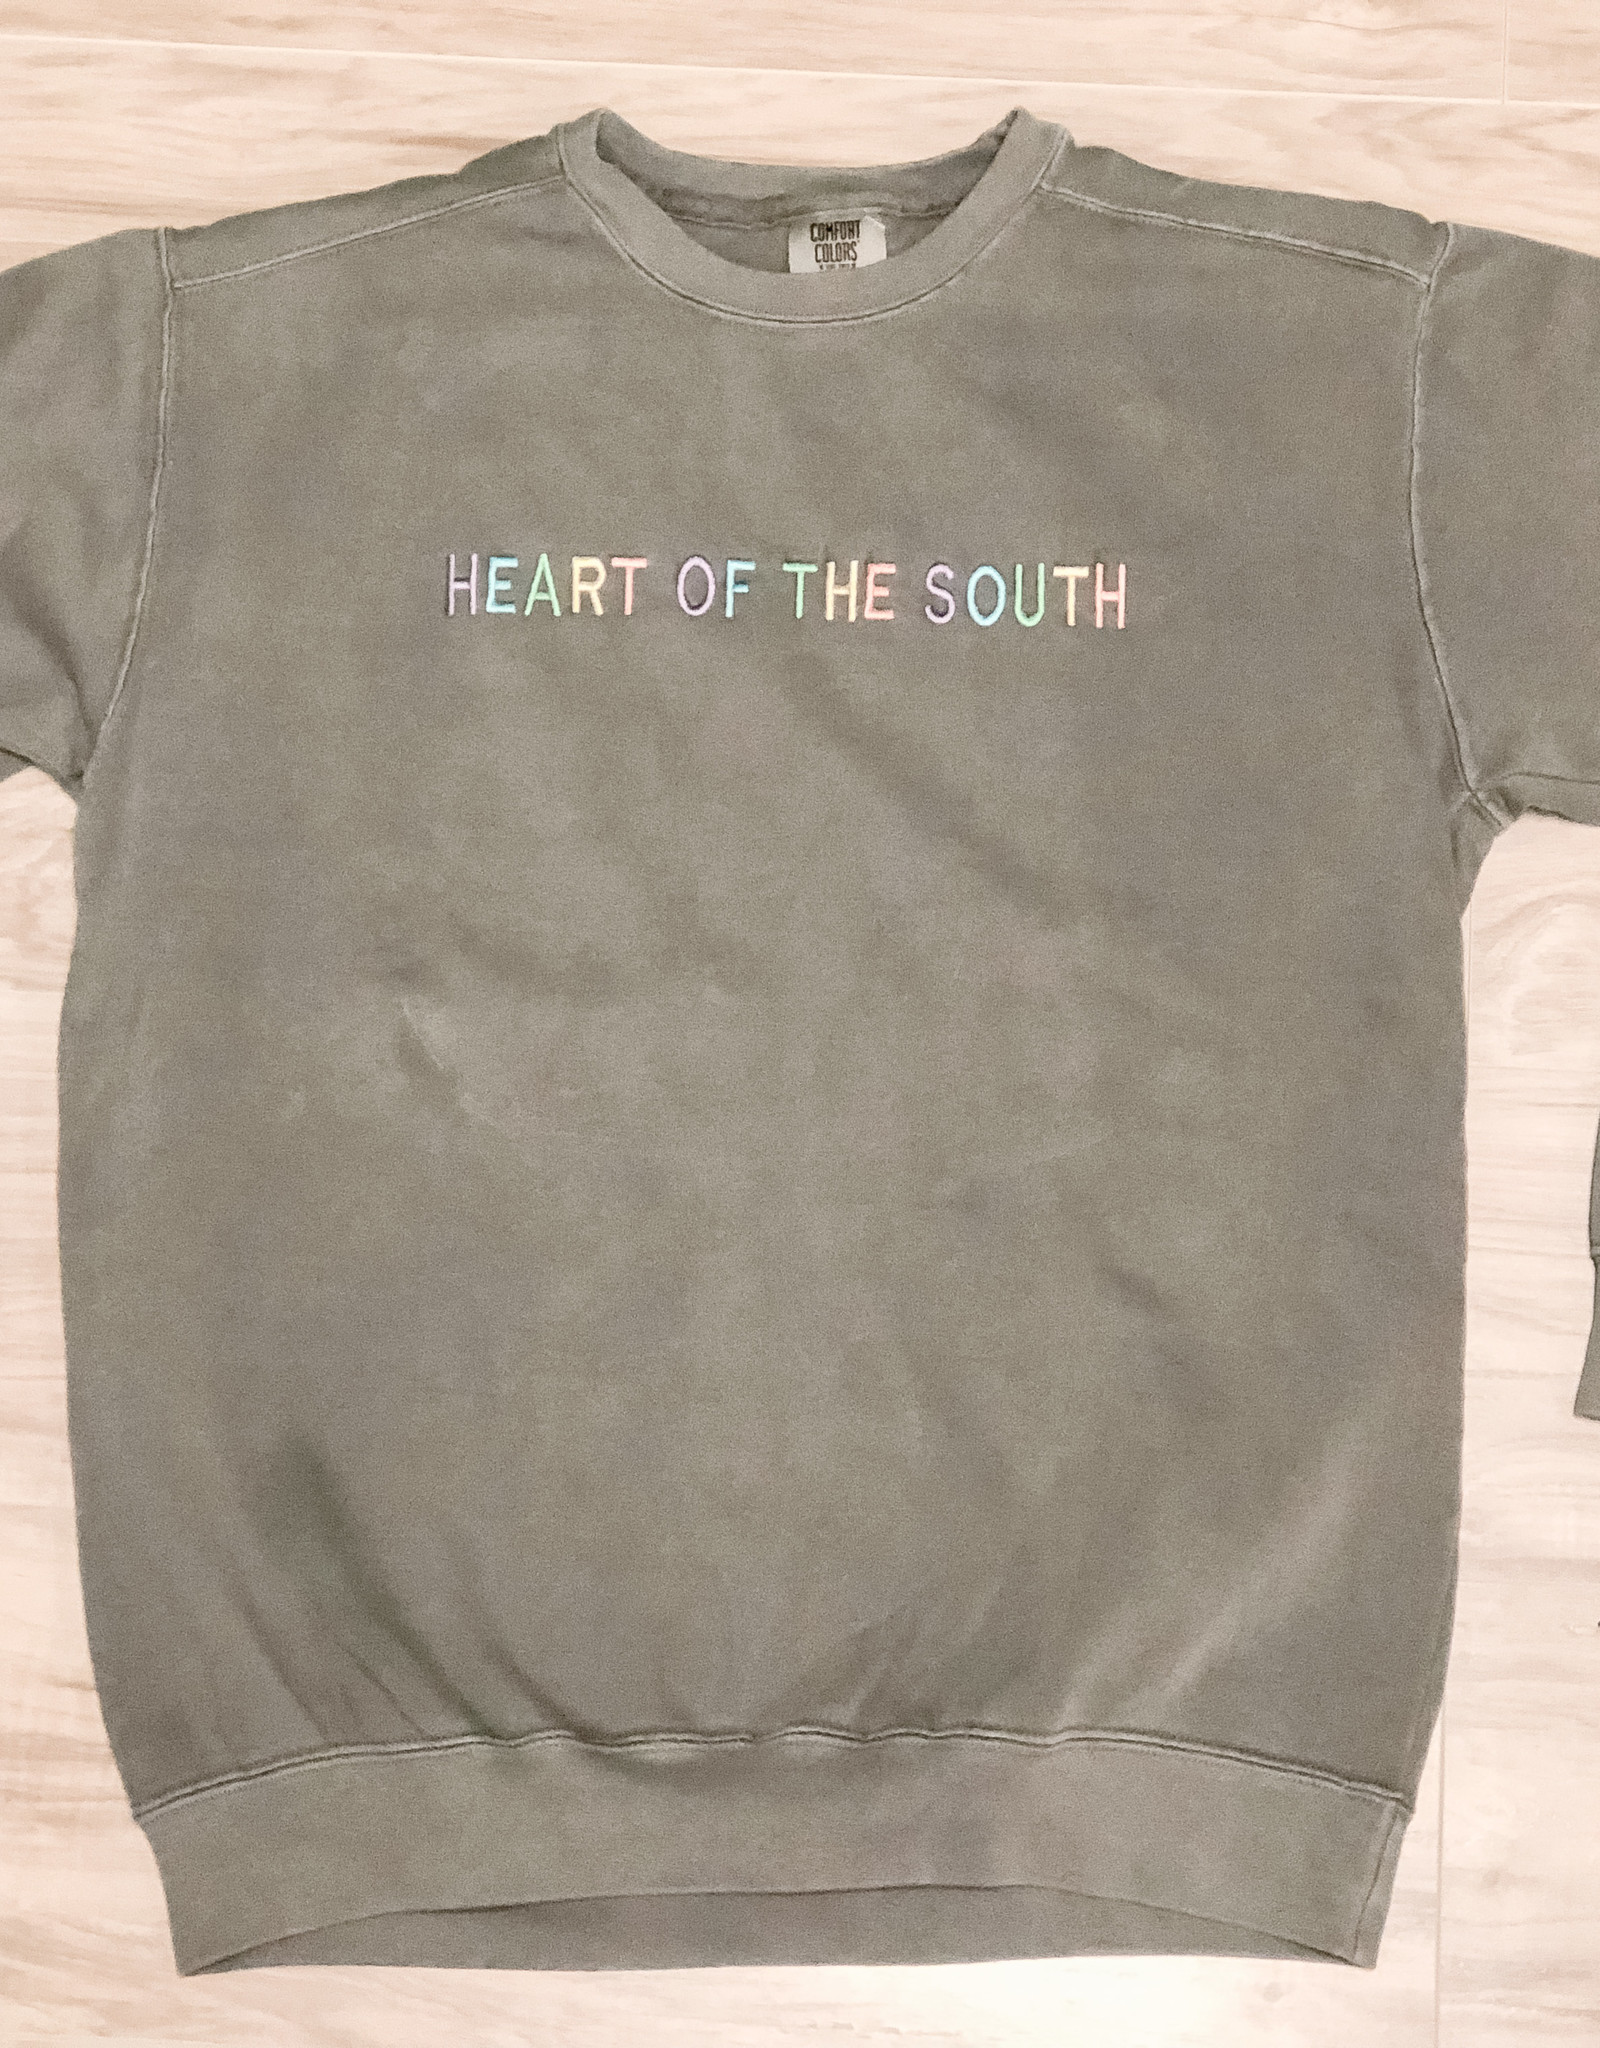 Heart of The South Heart of the South Sweatshirt